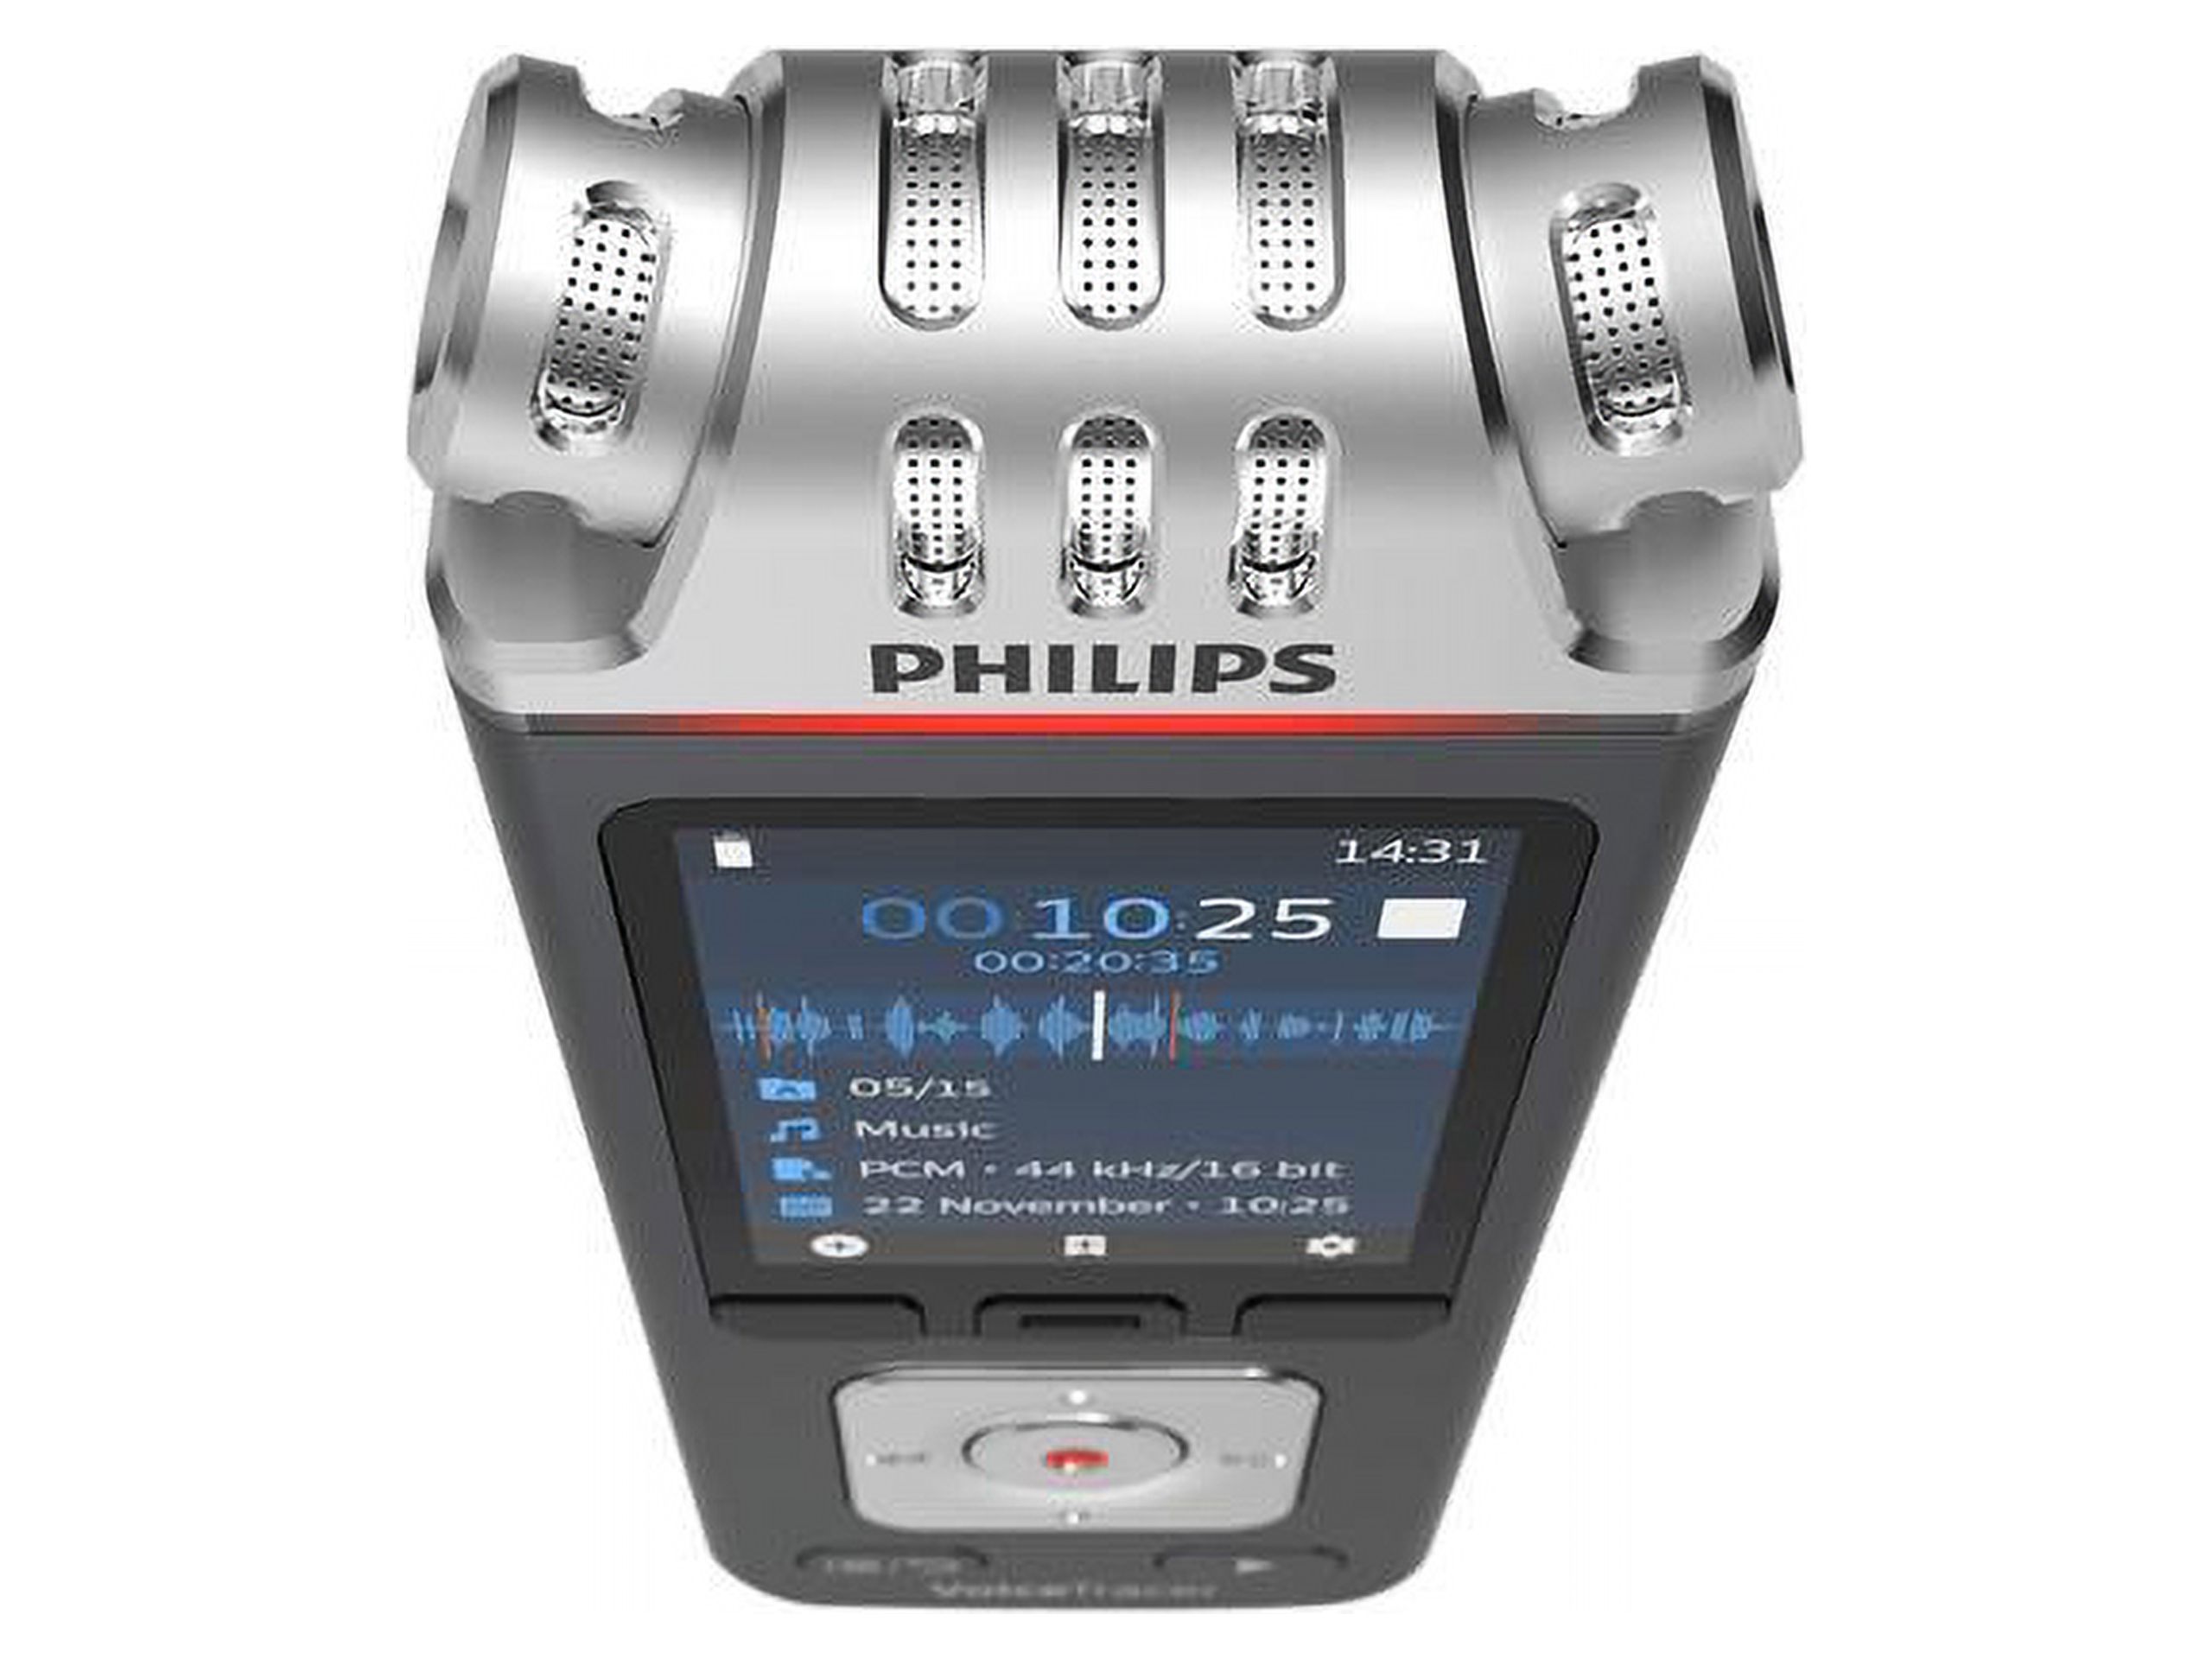 Philips DVT8110 VoiceTracer Meeting Recorder - image 4 of 9